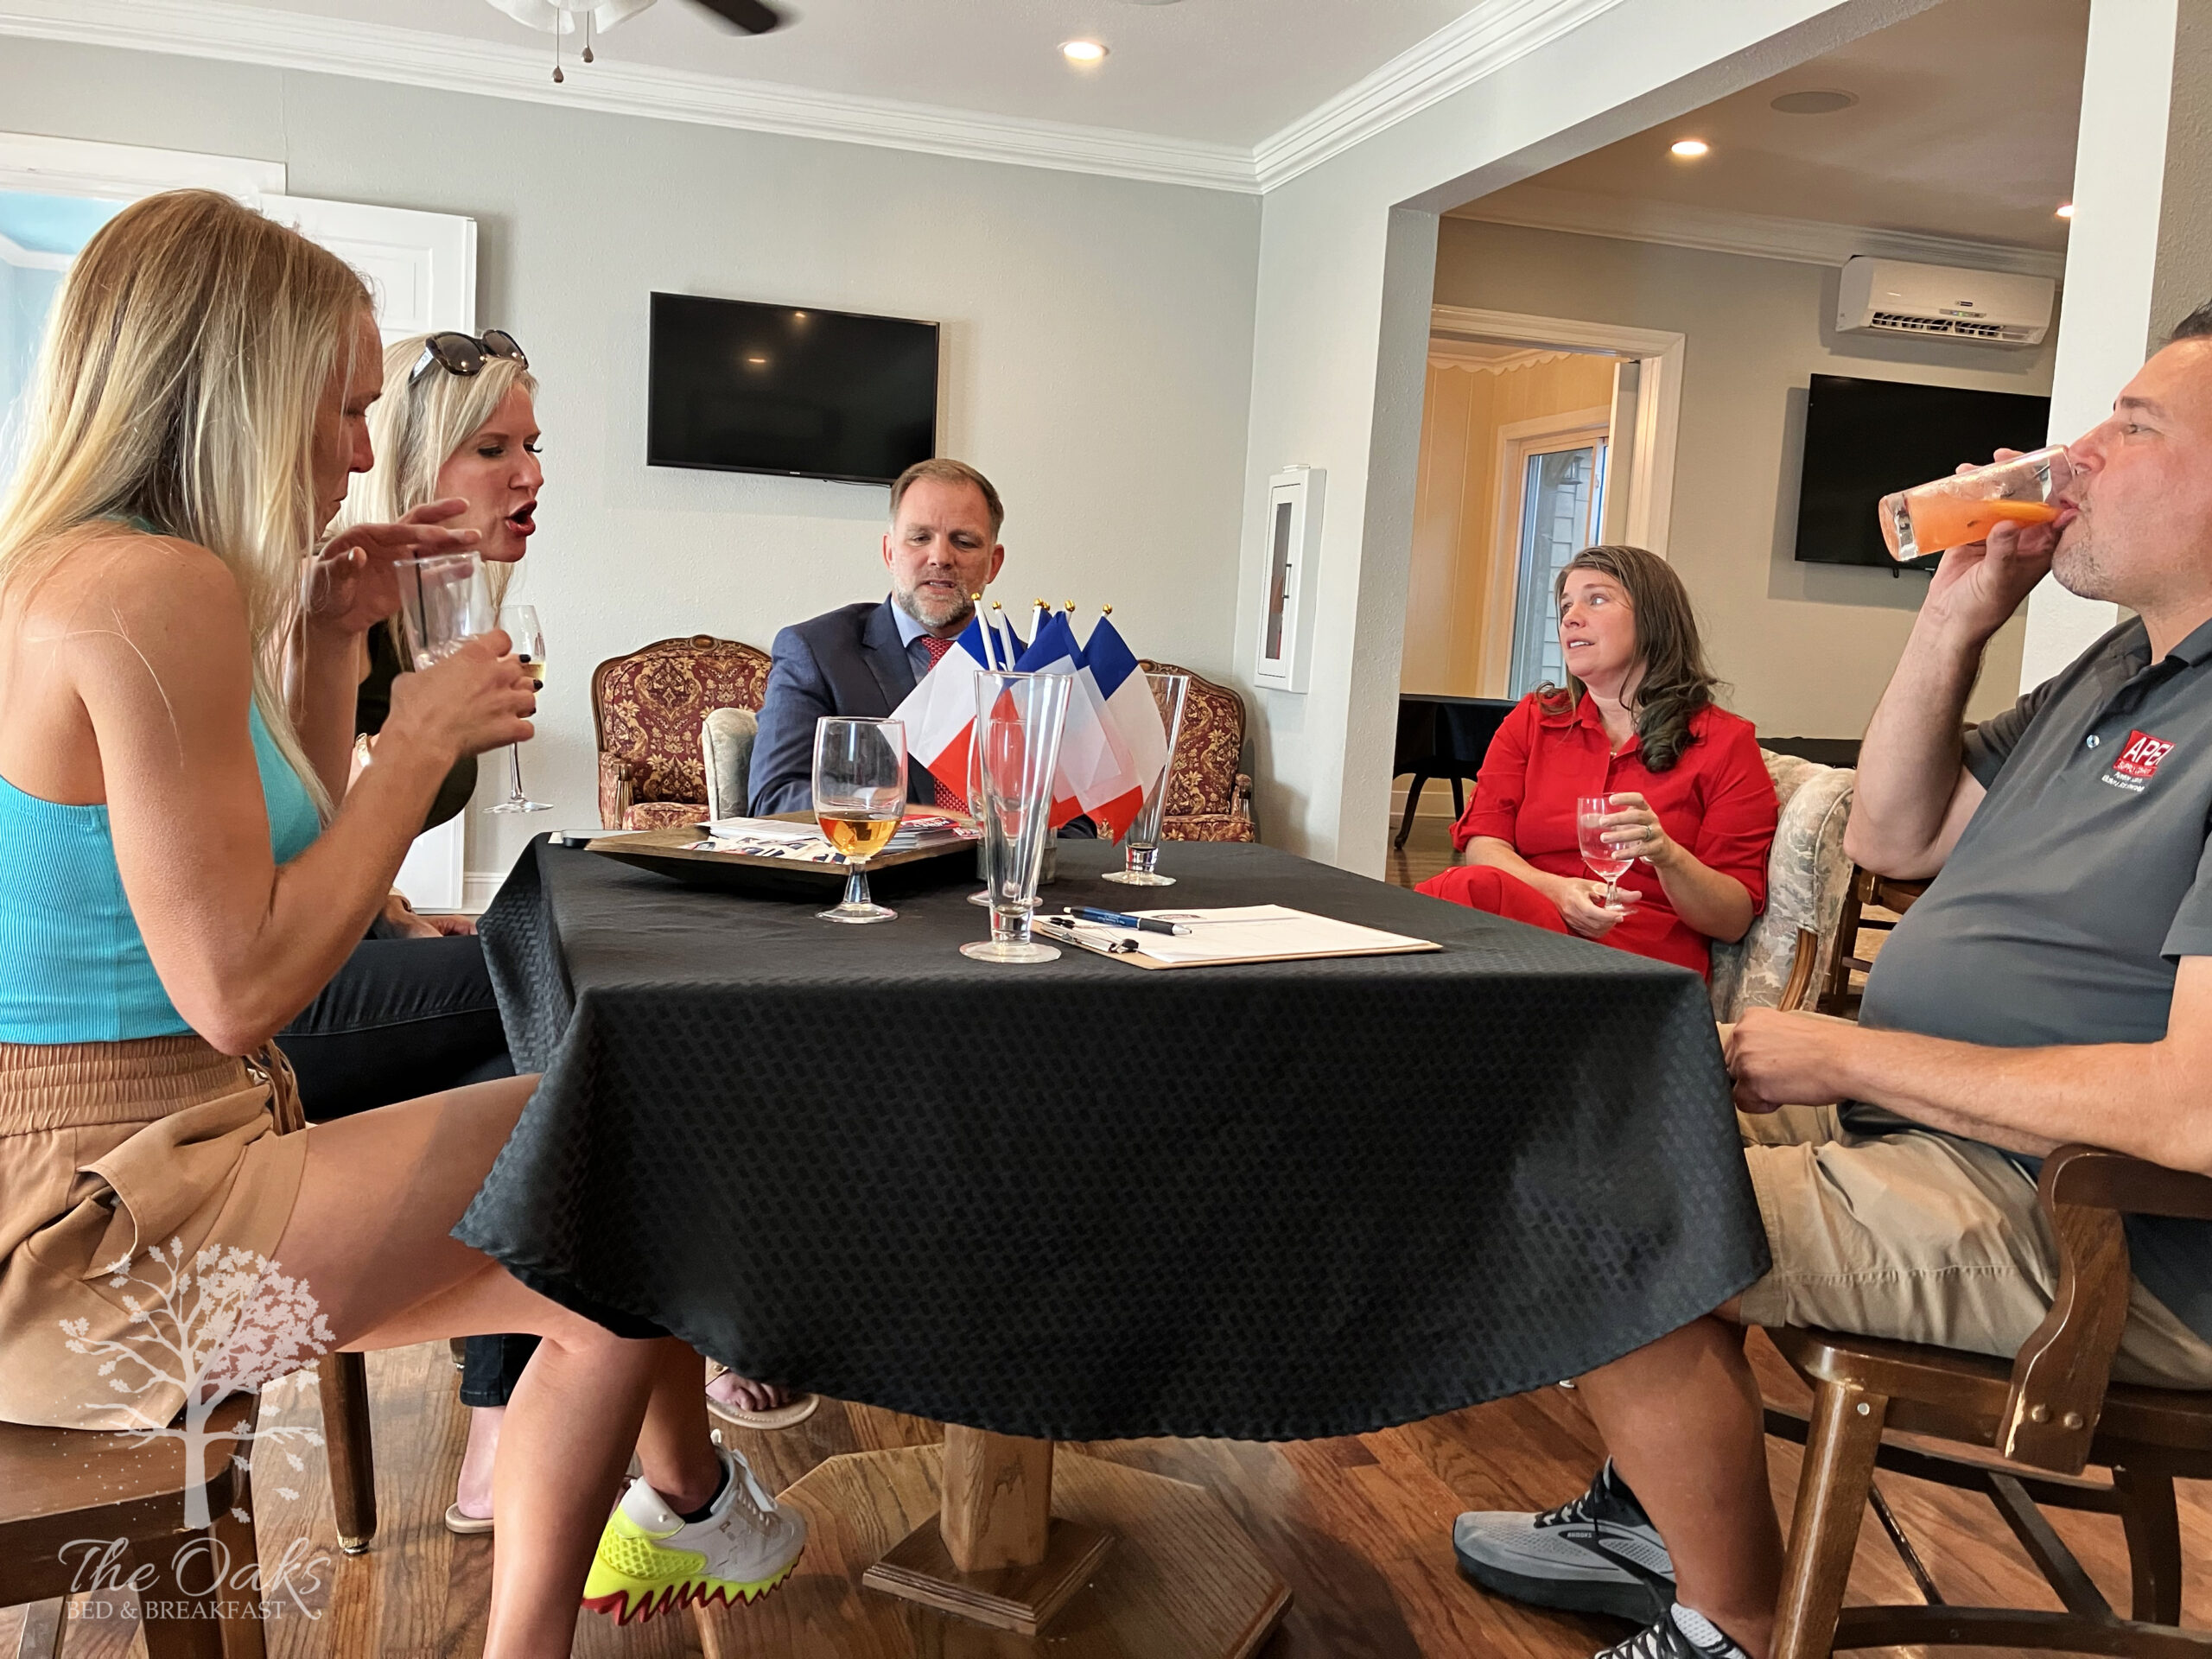 LIFE’S FLAVORS 8/10 Candidate Meet & Greet ALLISON LIBBY-THESING OF THE OAKS BED & BREAKFAST